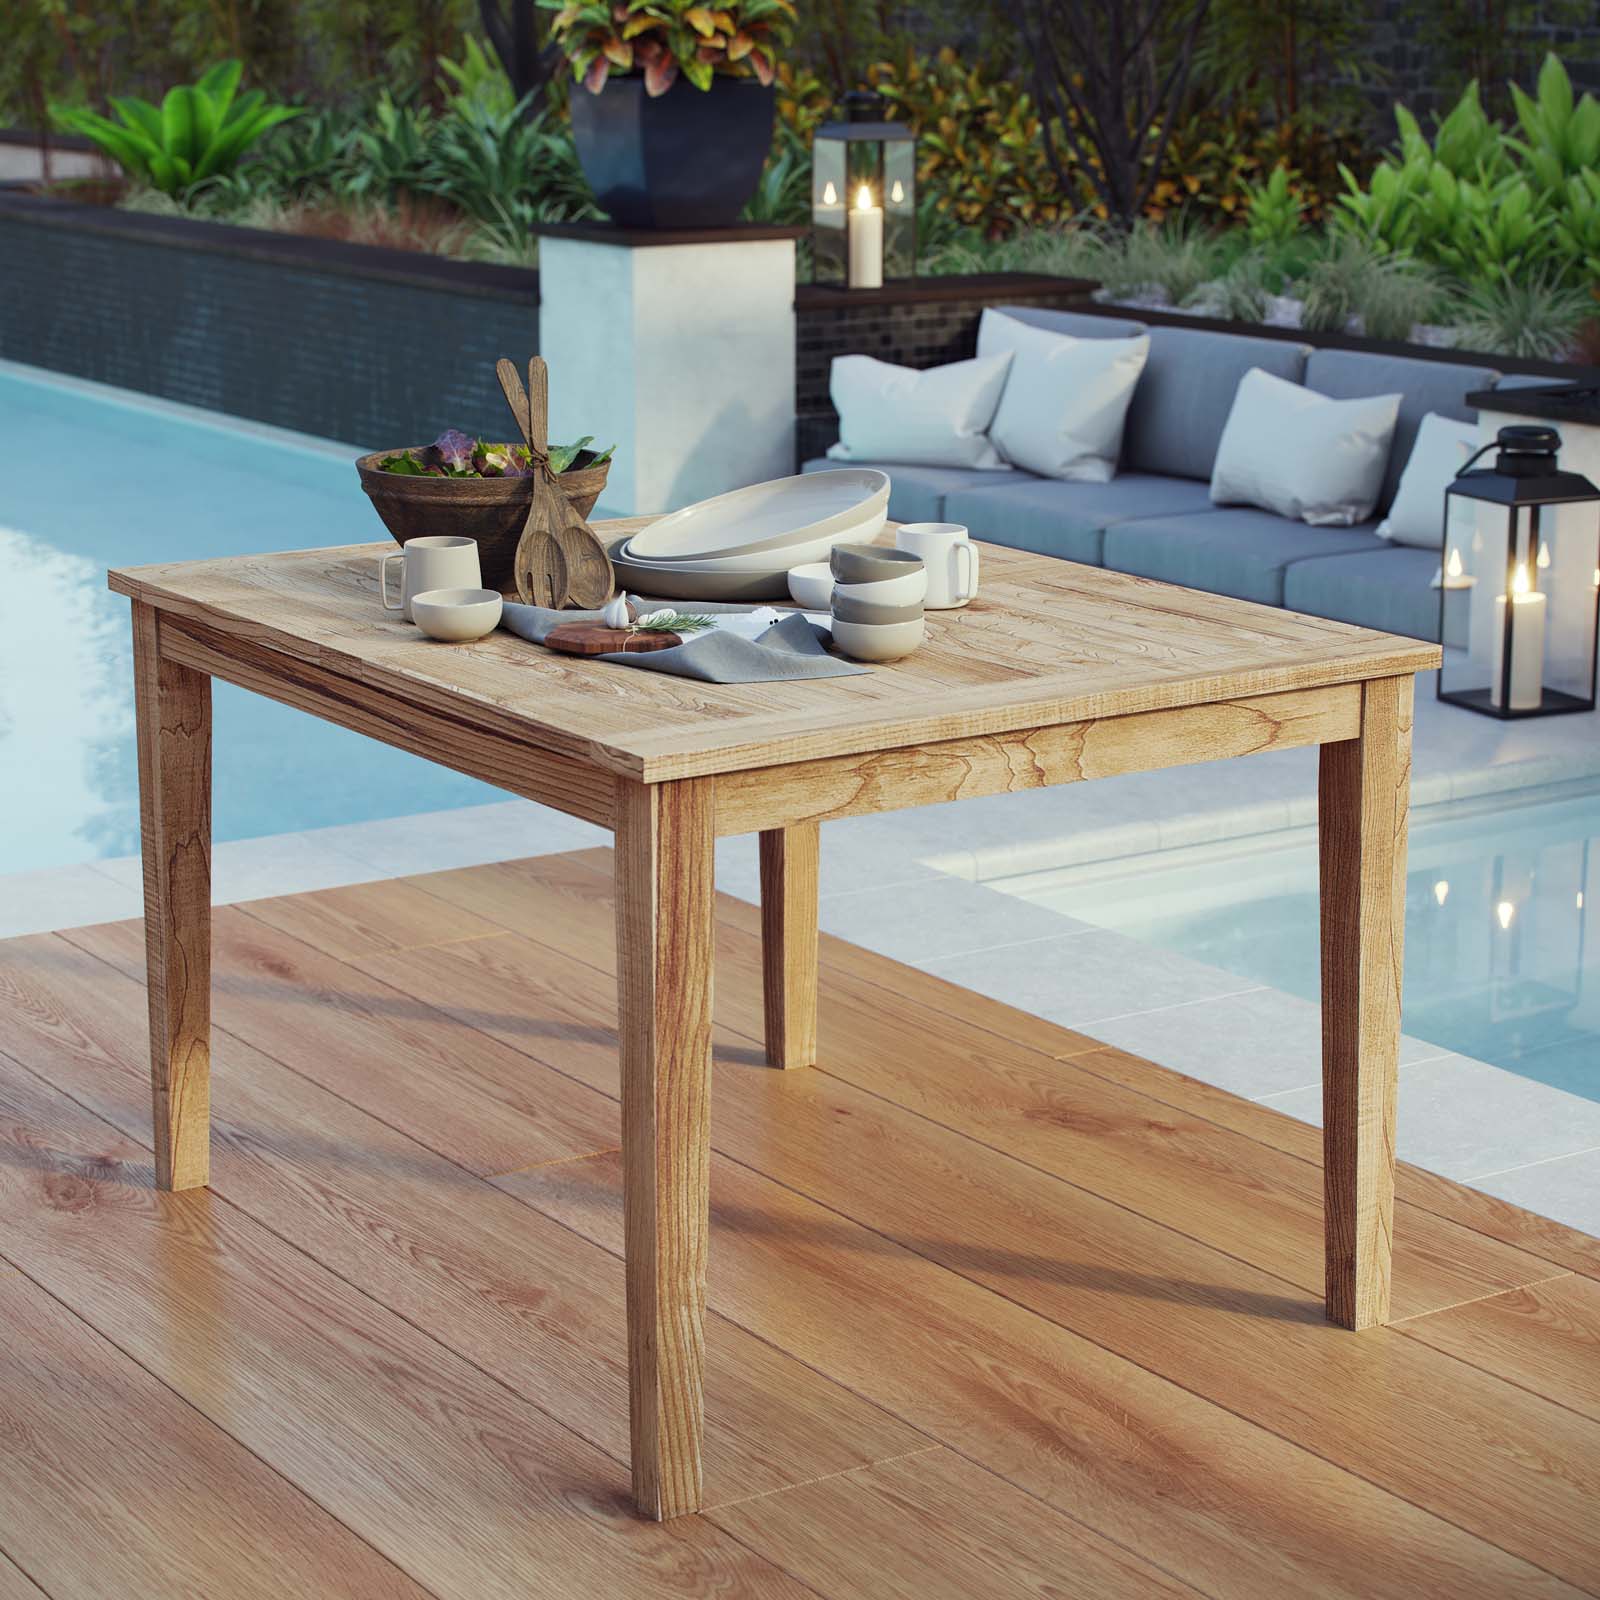 Small Teak Dining Table: Perfect For Compact Spaces